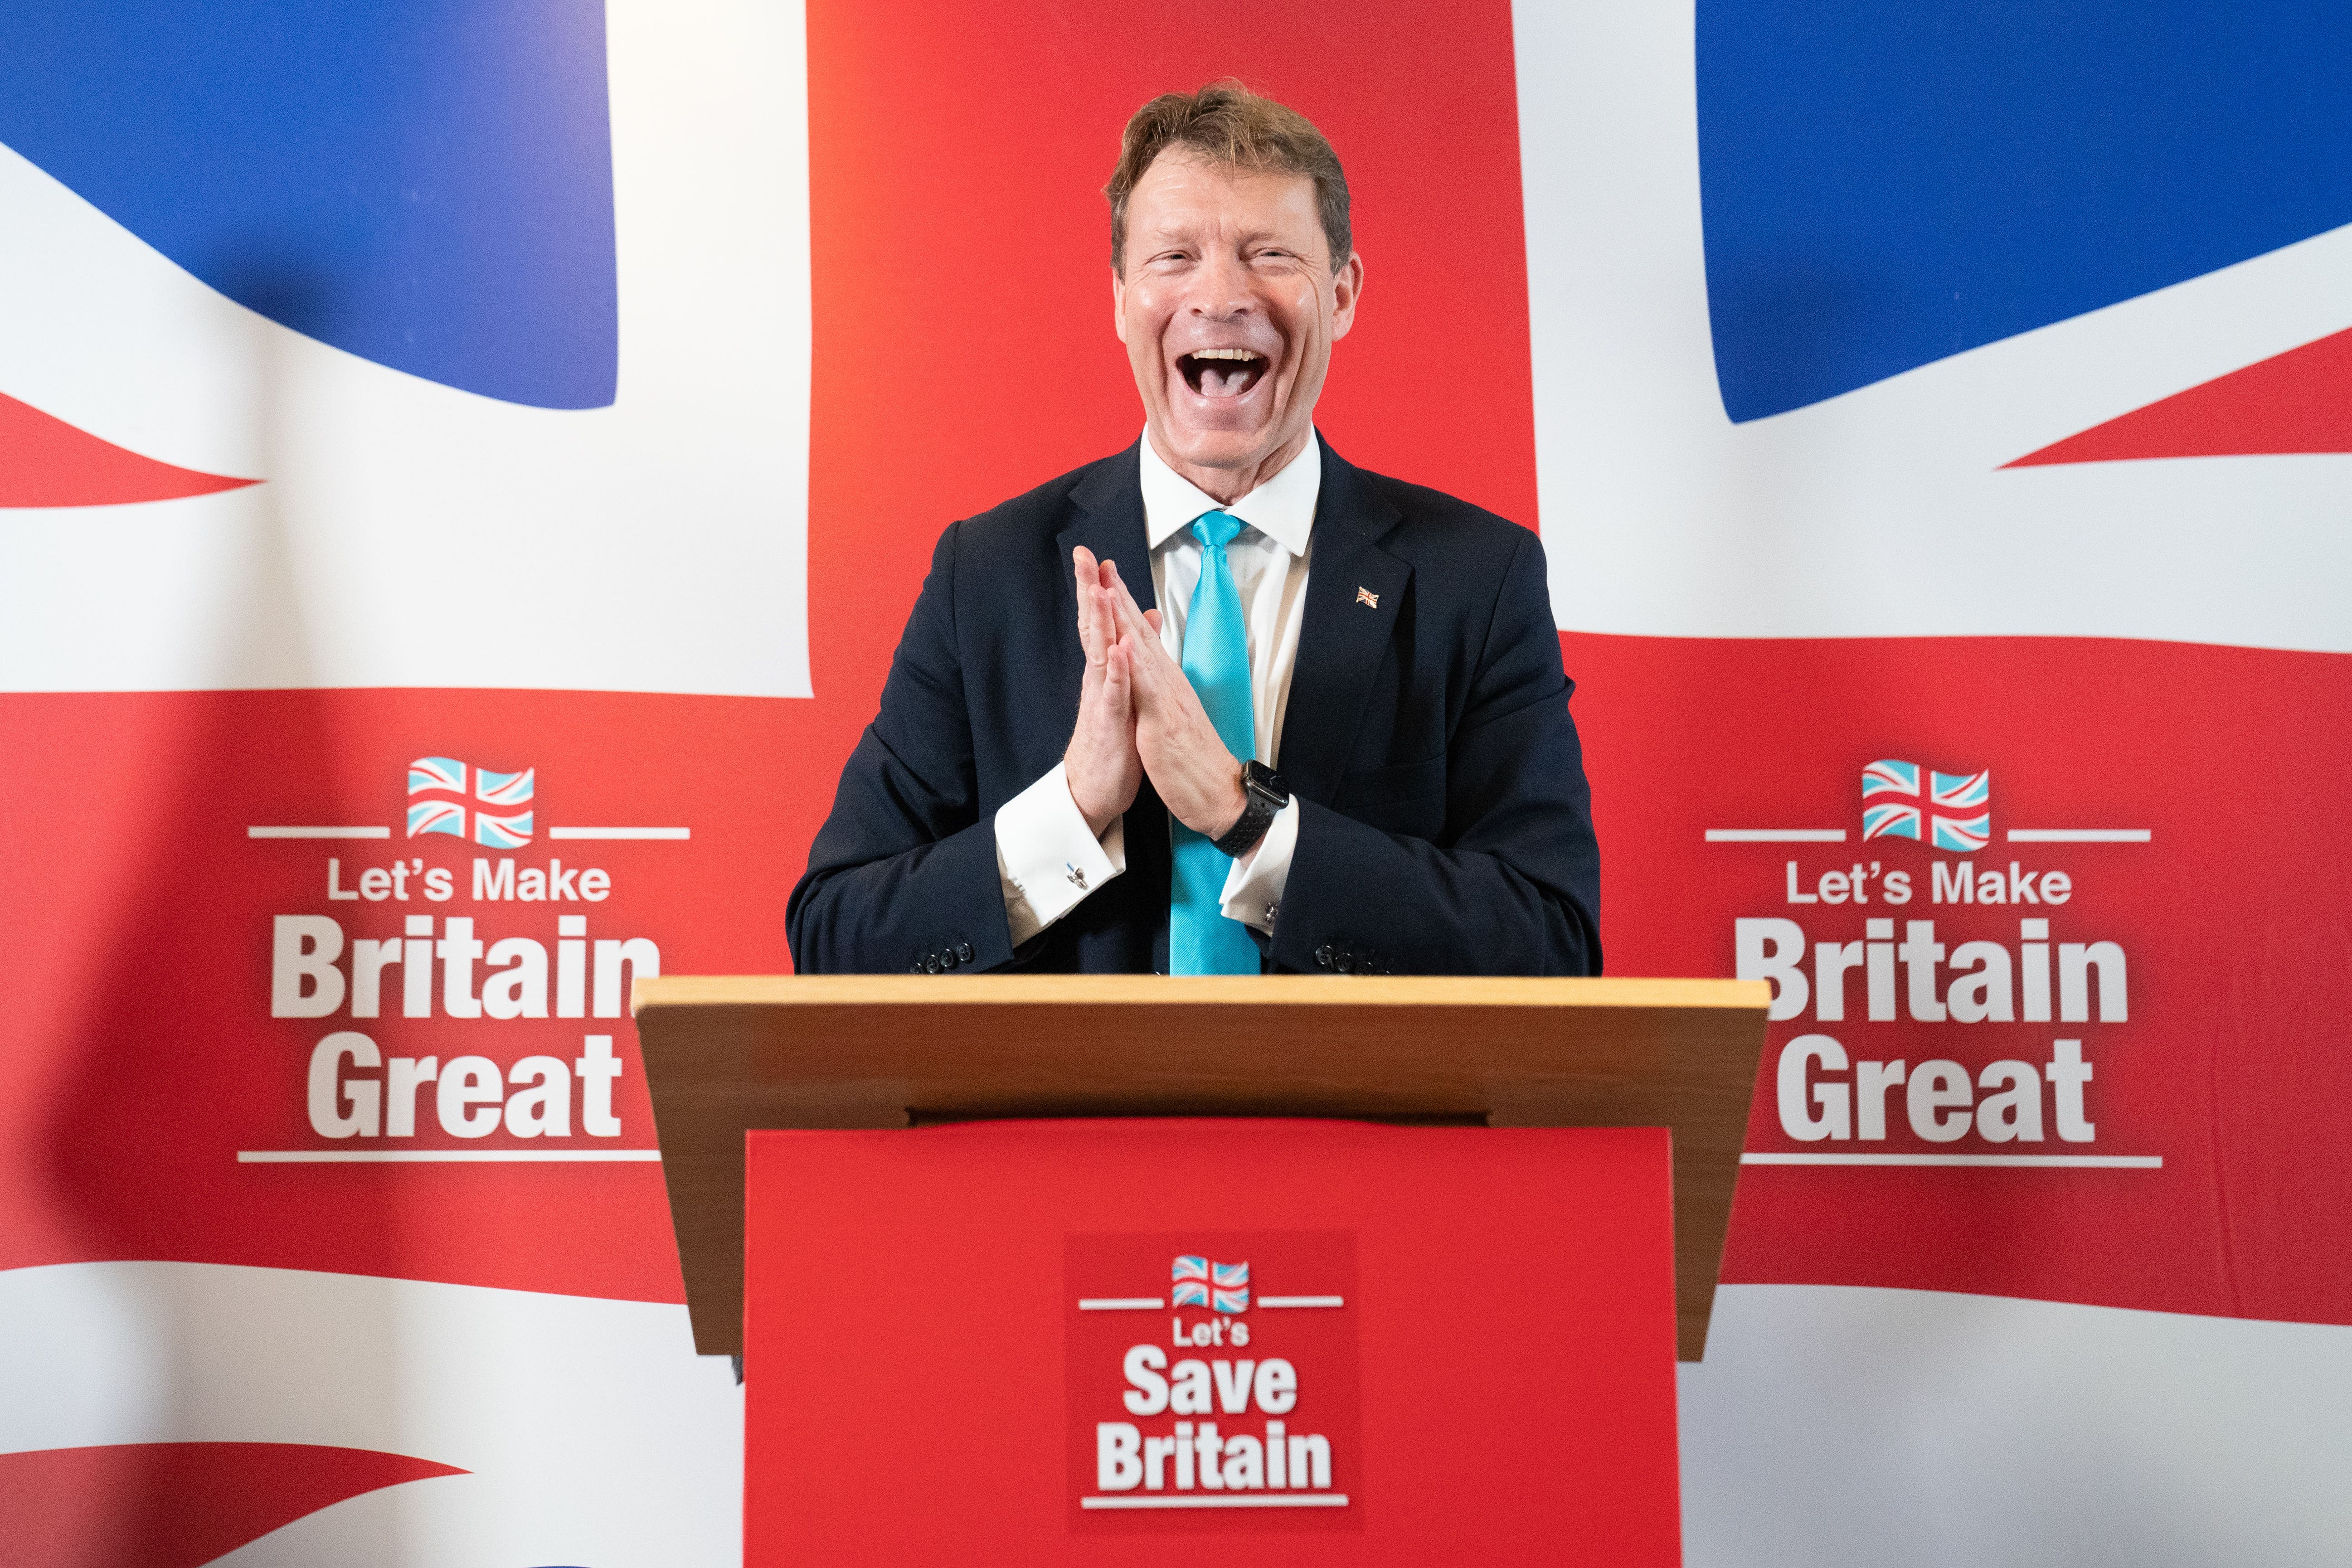 Reform UK leader Richard Tice stated the party is ‘solidifying’ itself as the third largest in the UK